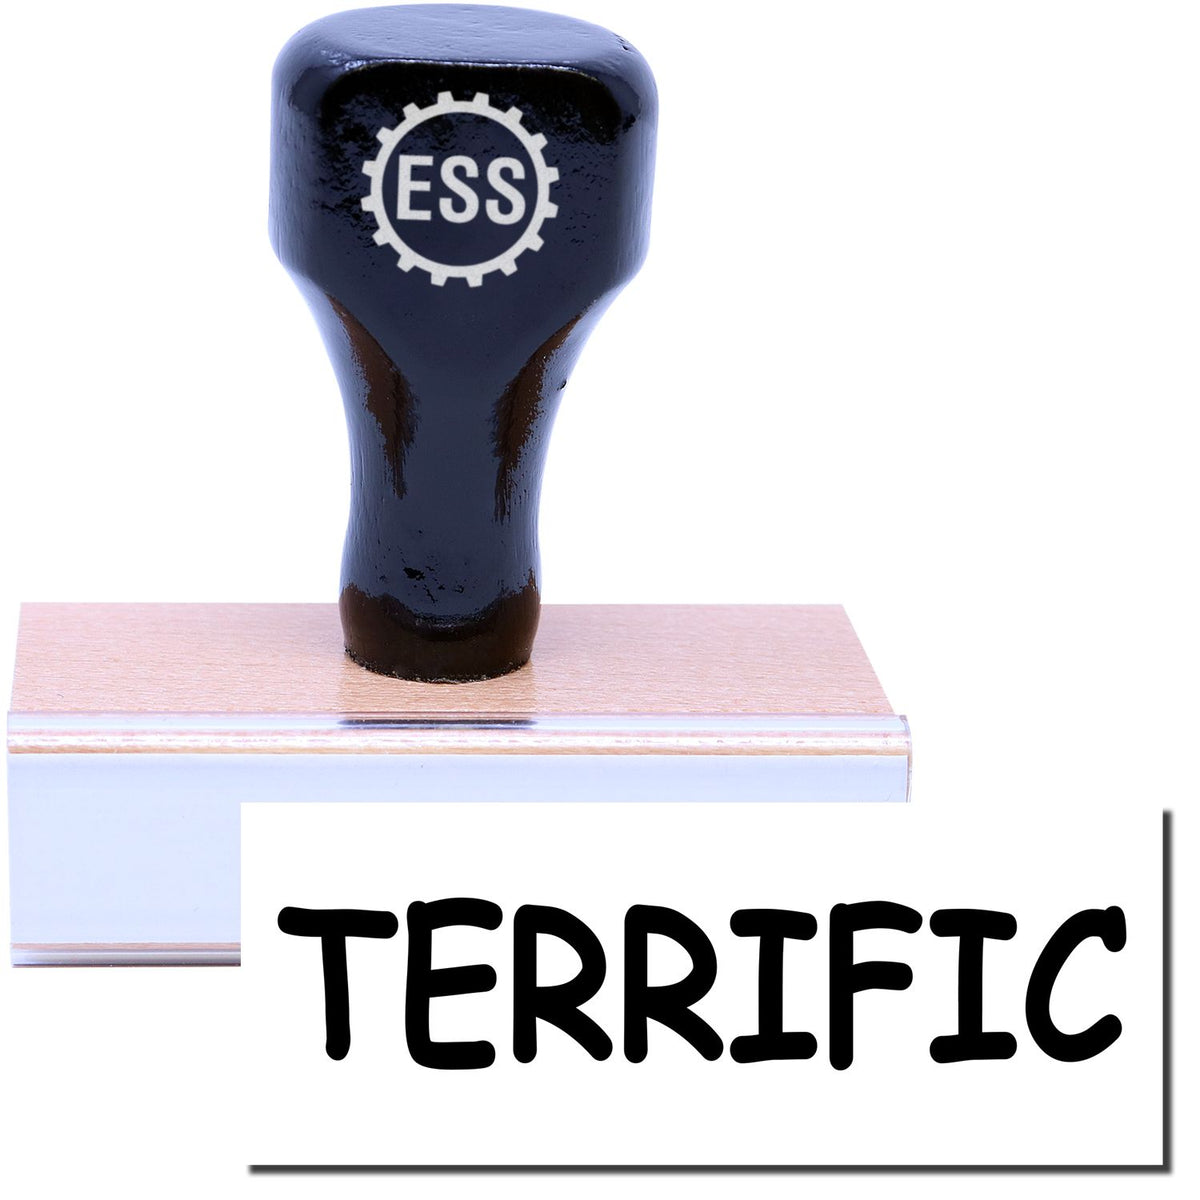 A stock office rubber stamp with a stamped image showing how the text &quot;TERRIFIC&quot; is displayed after stamping.